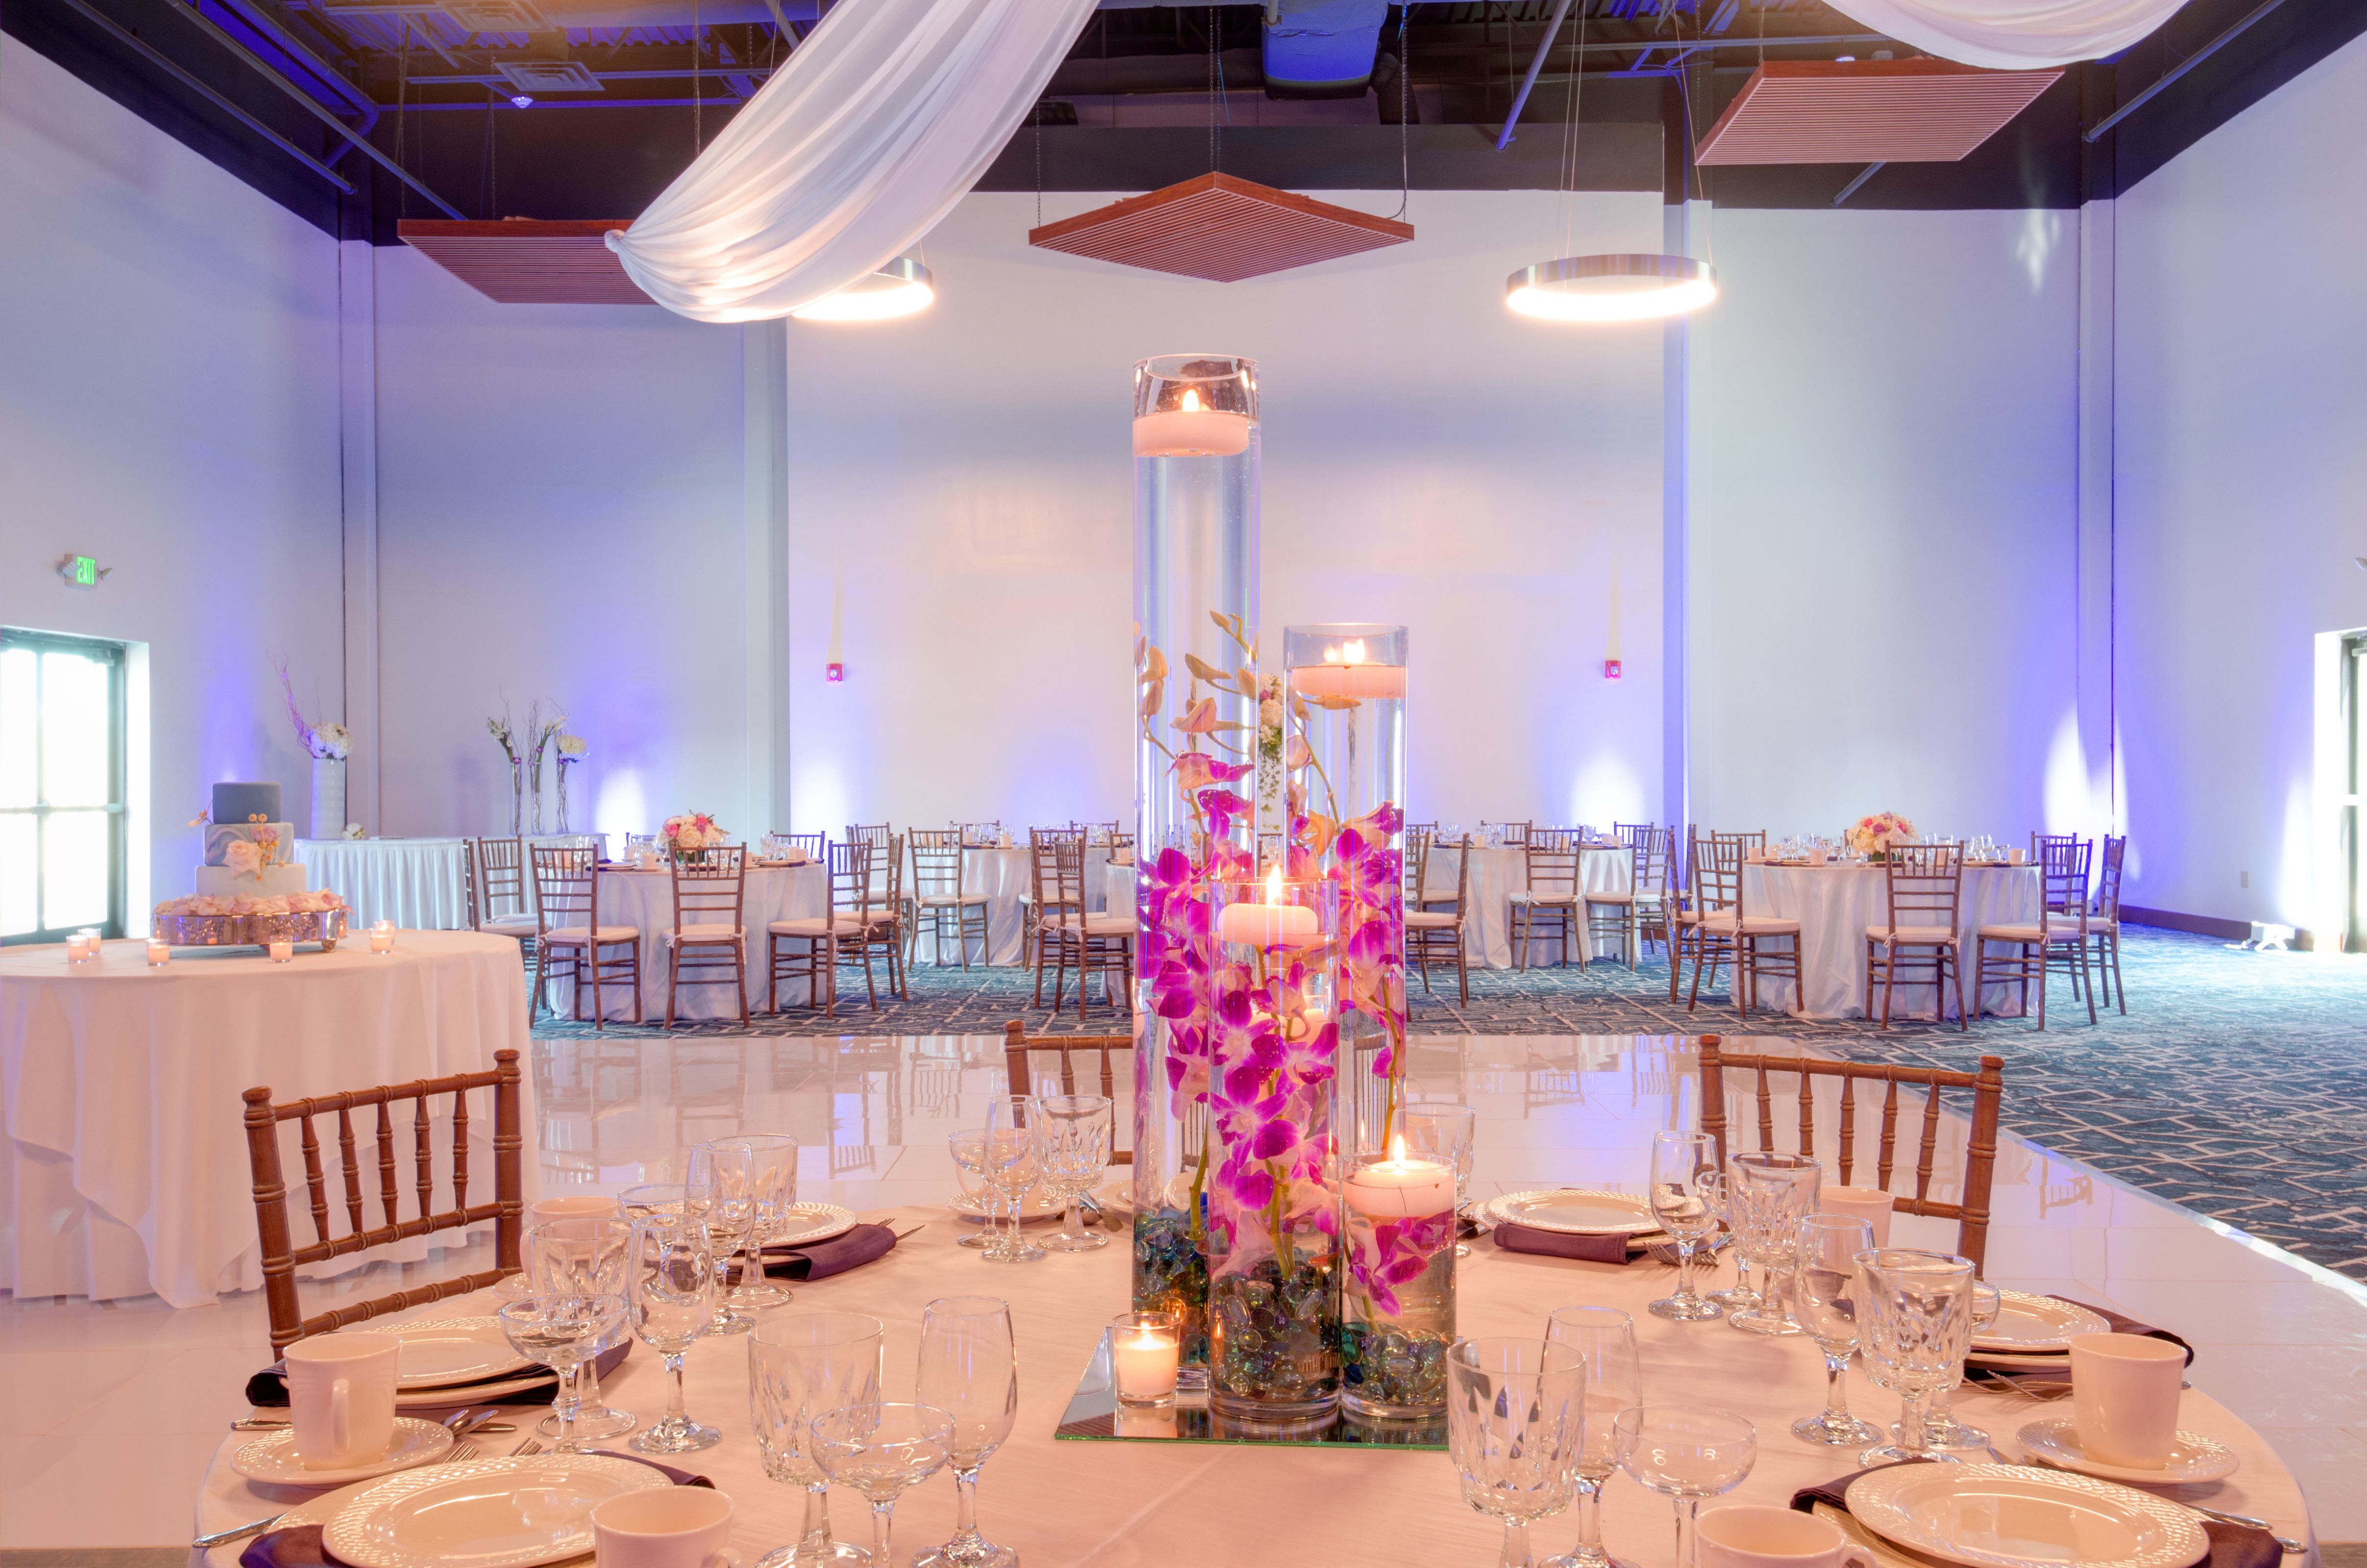 Ballroom Banquet Setup with Round Tables and Chairs